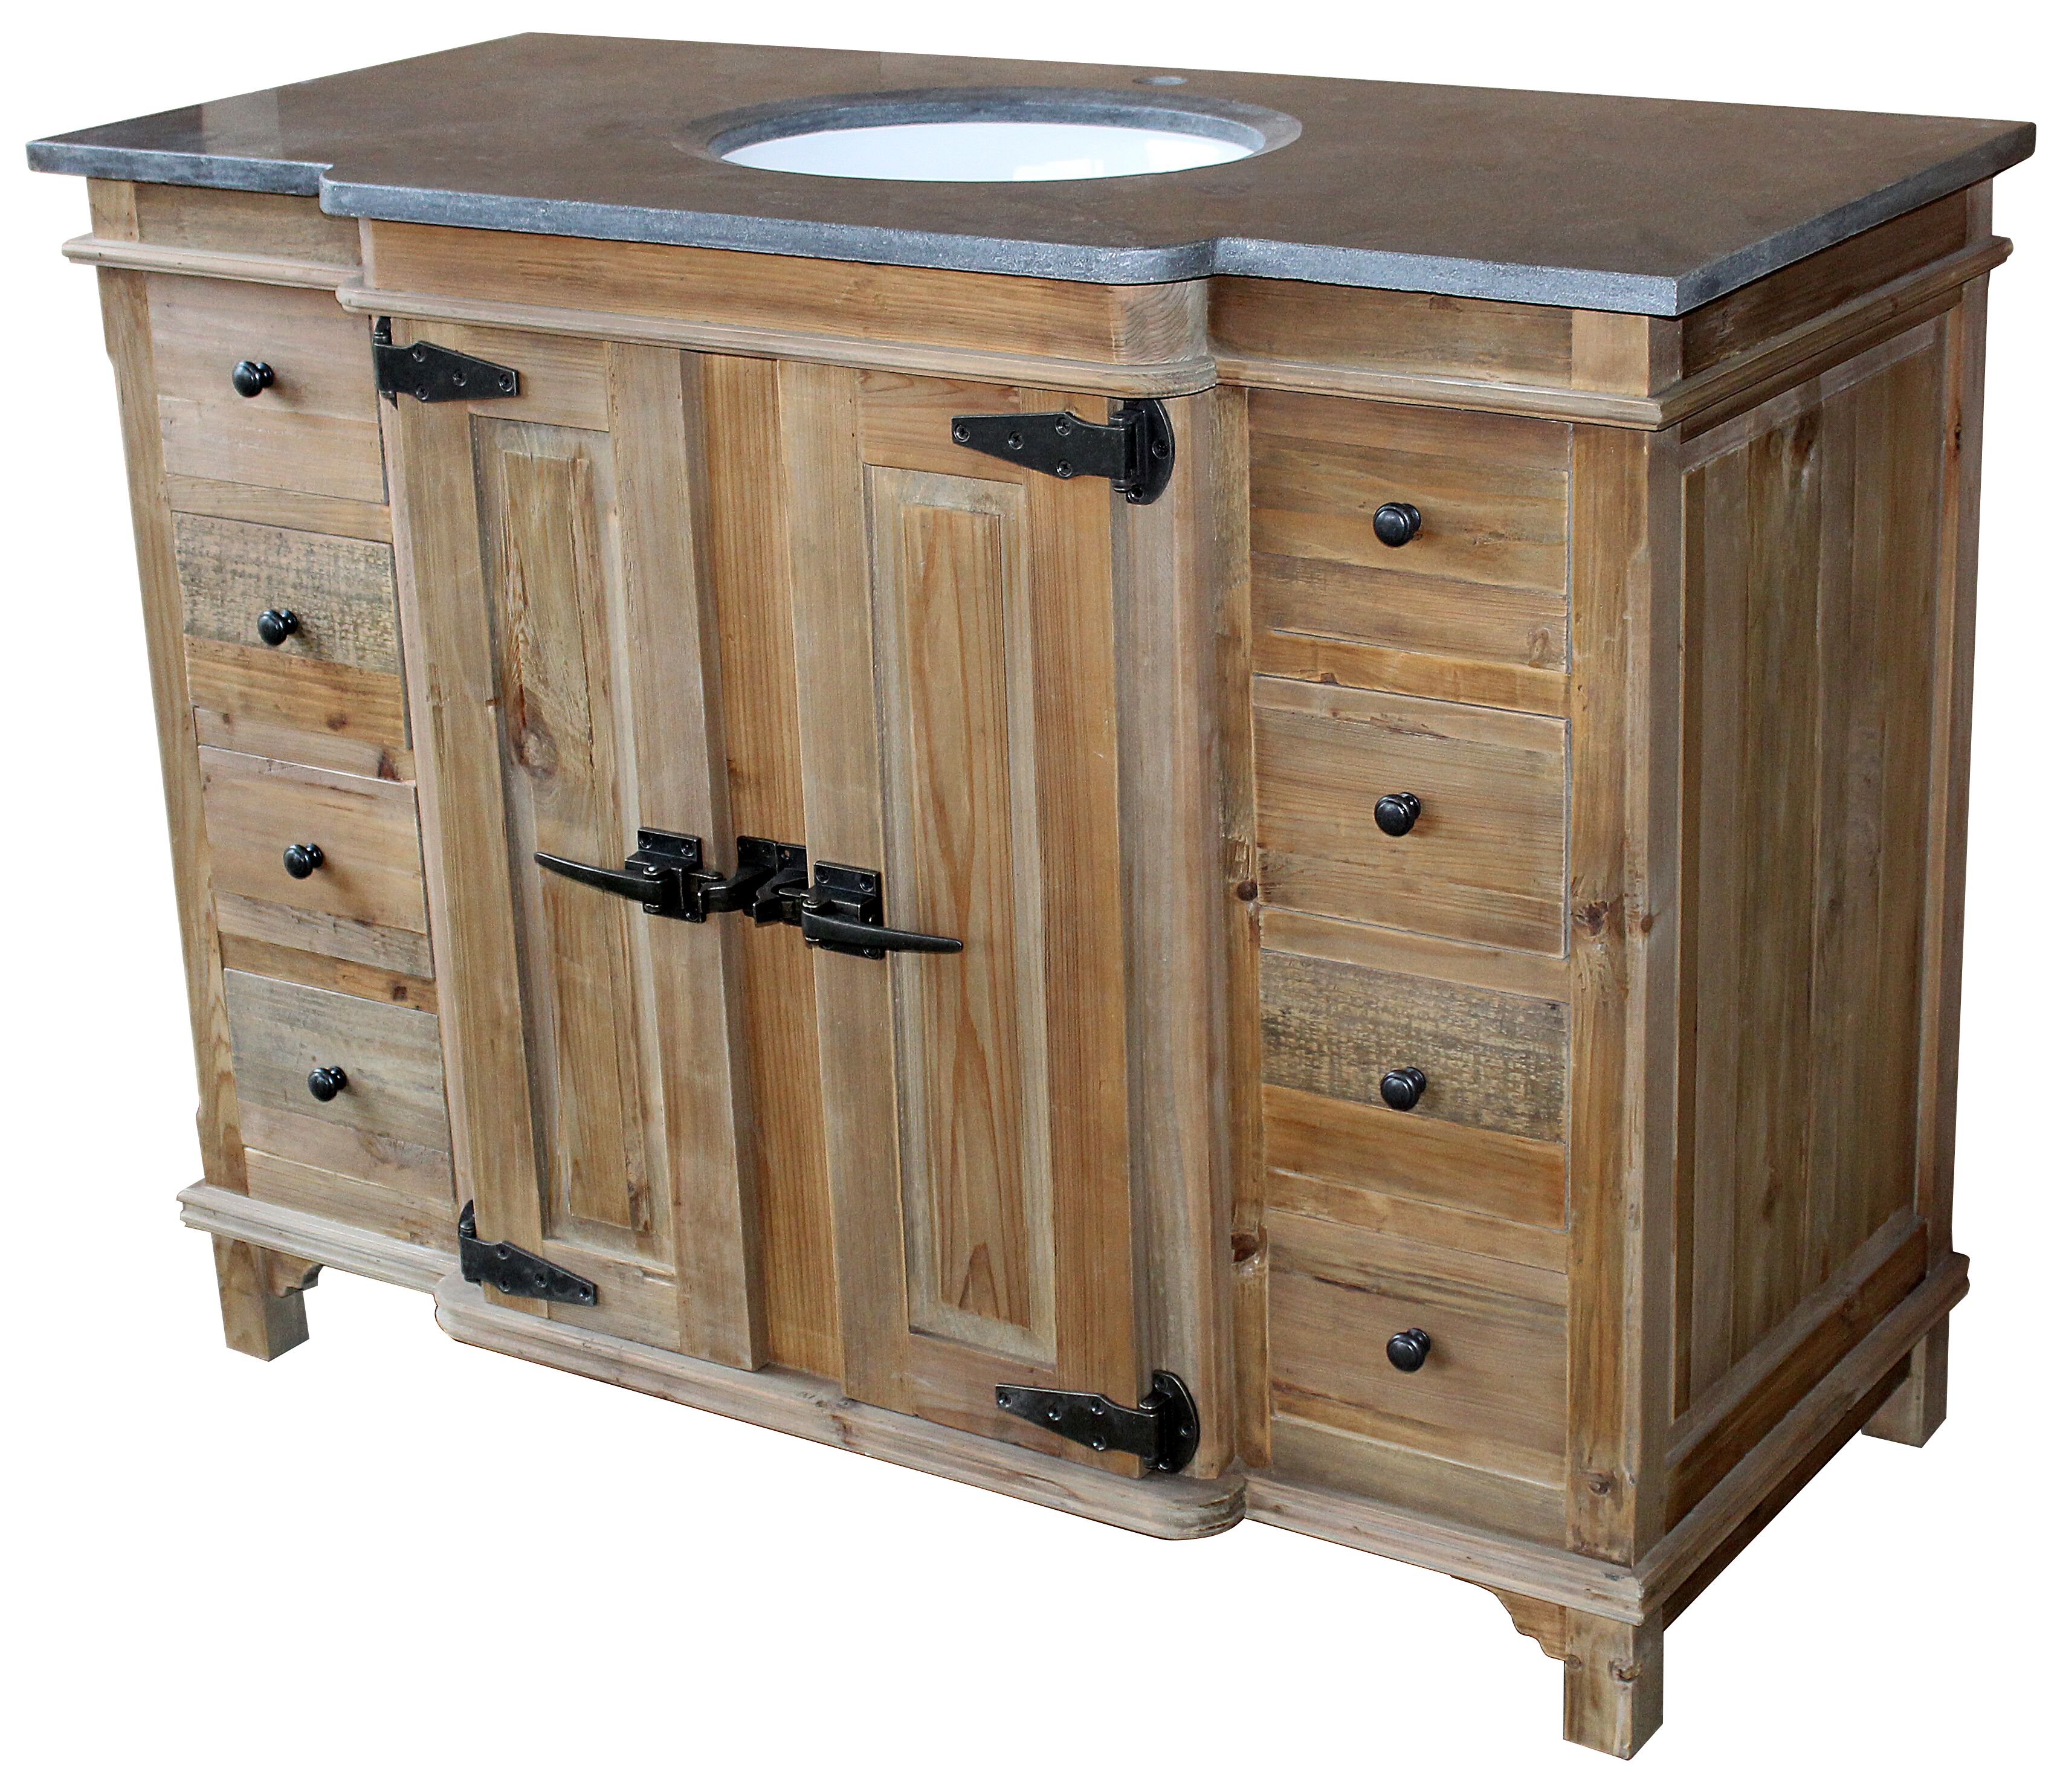 48" Handcrafted Reclaimed Pine Solid Wood Single Fridgey Bath Vanity Natural Finish